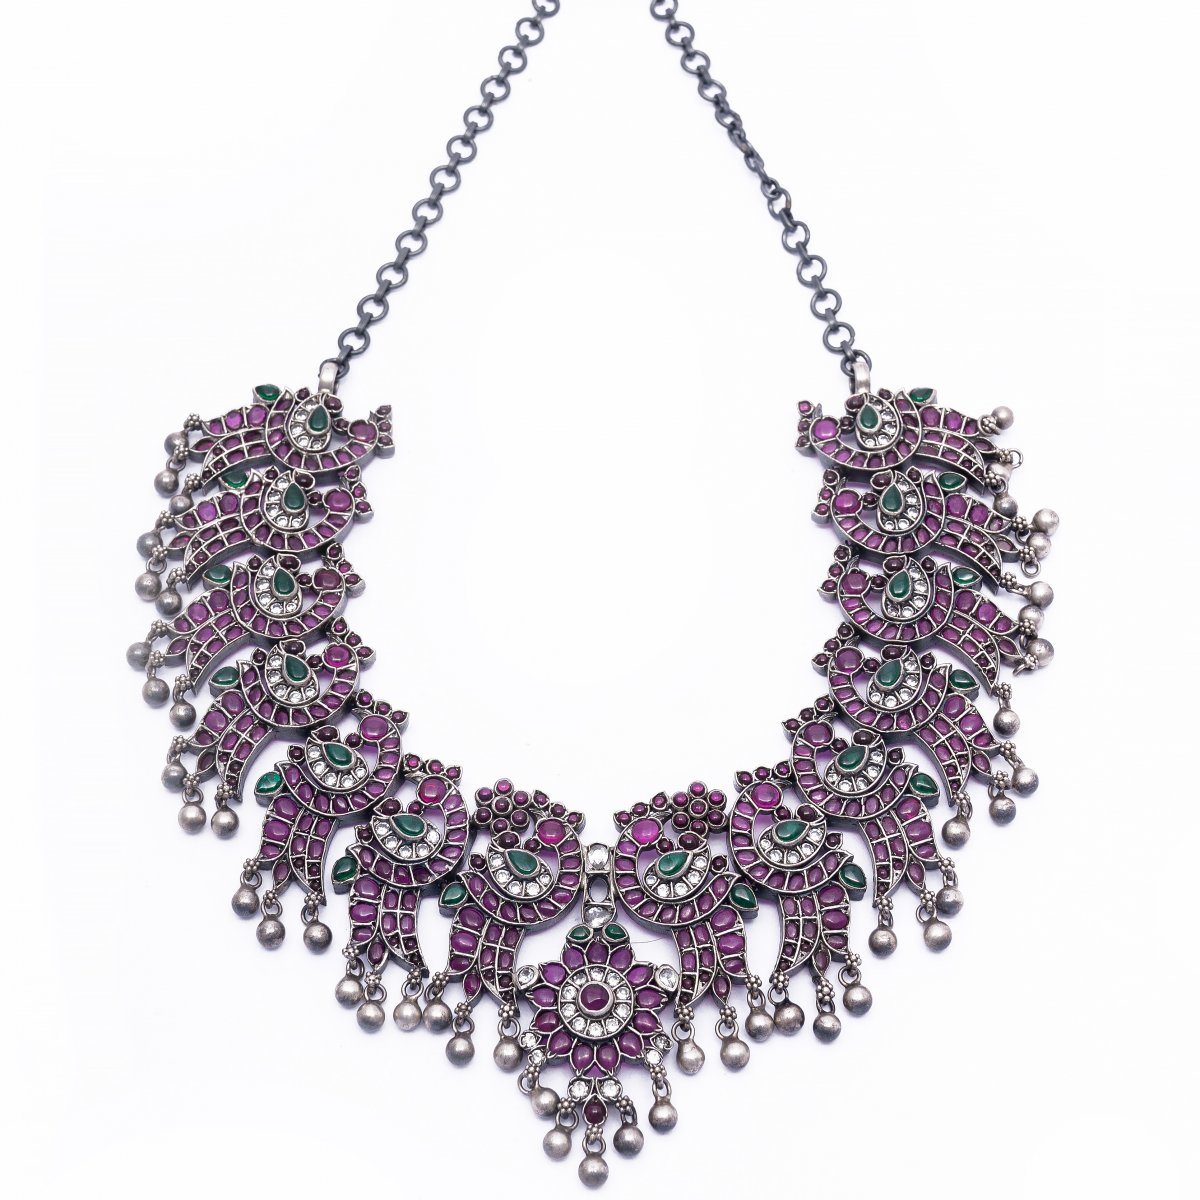 92.5 SILVER TRADITIONAL PARTY NECKLACE FOR WOMEN AND GIRLS